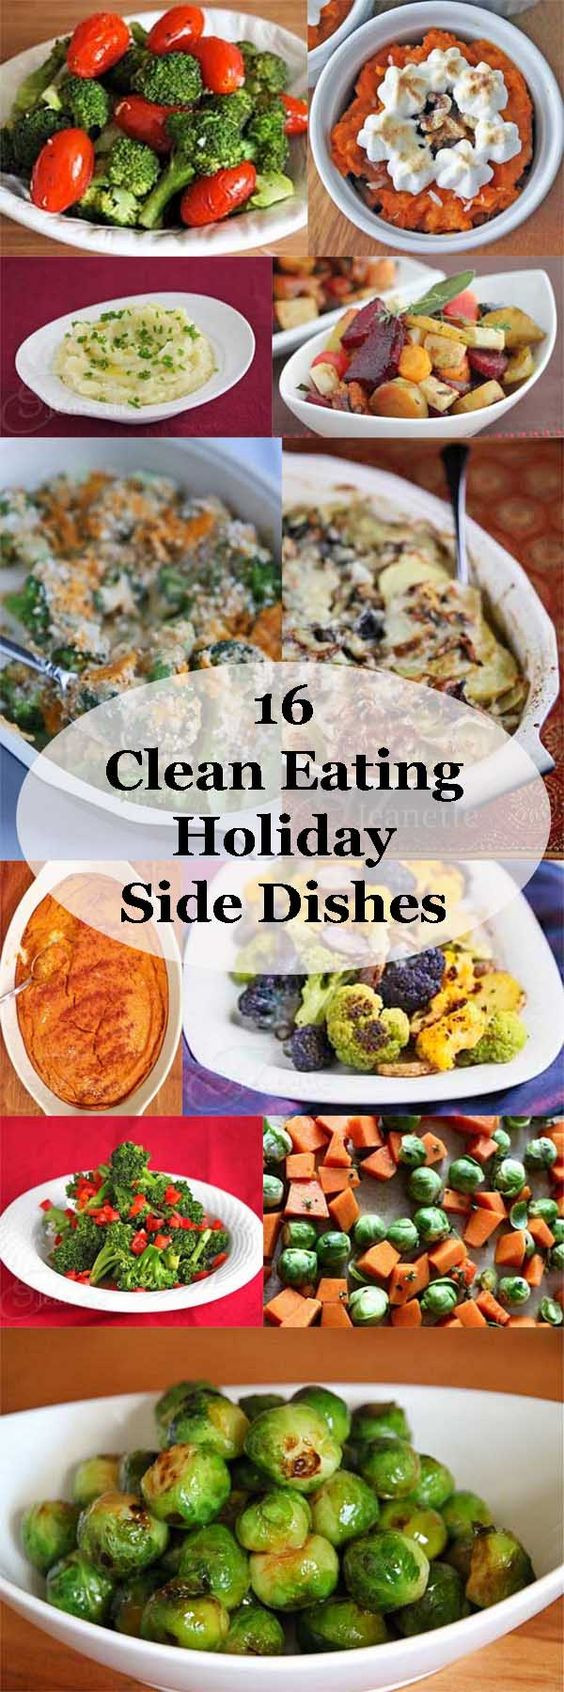 Christmas Side Dishes Pinterest
 16 Clean Eating Holiday Side Dish Recipes